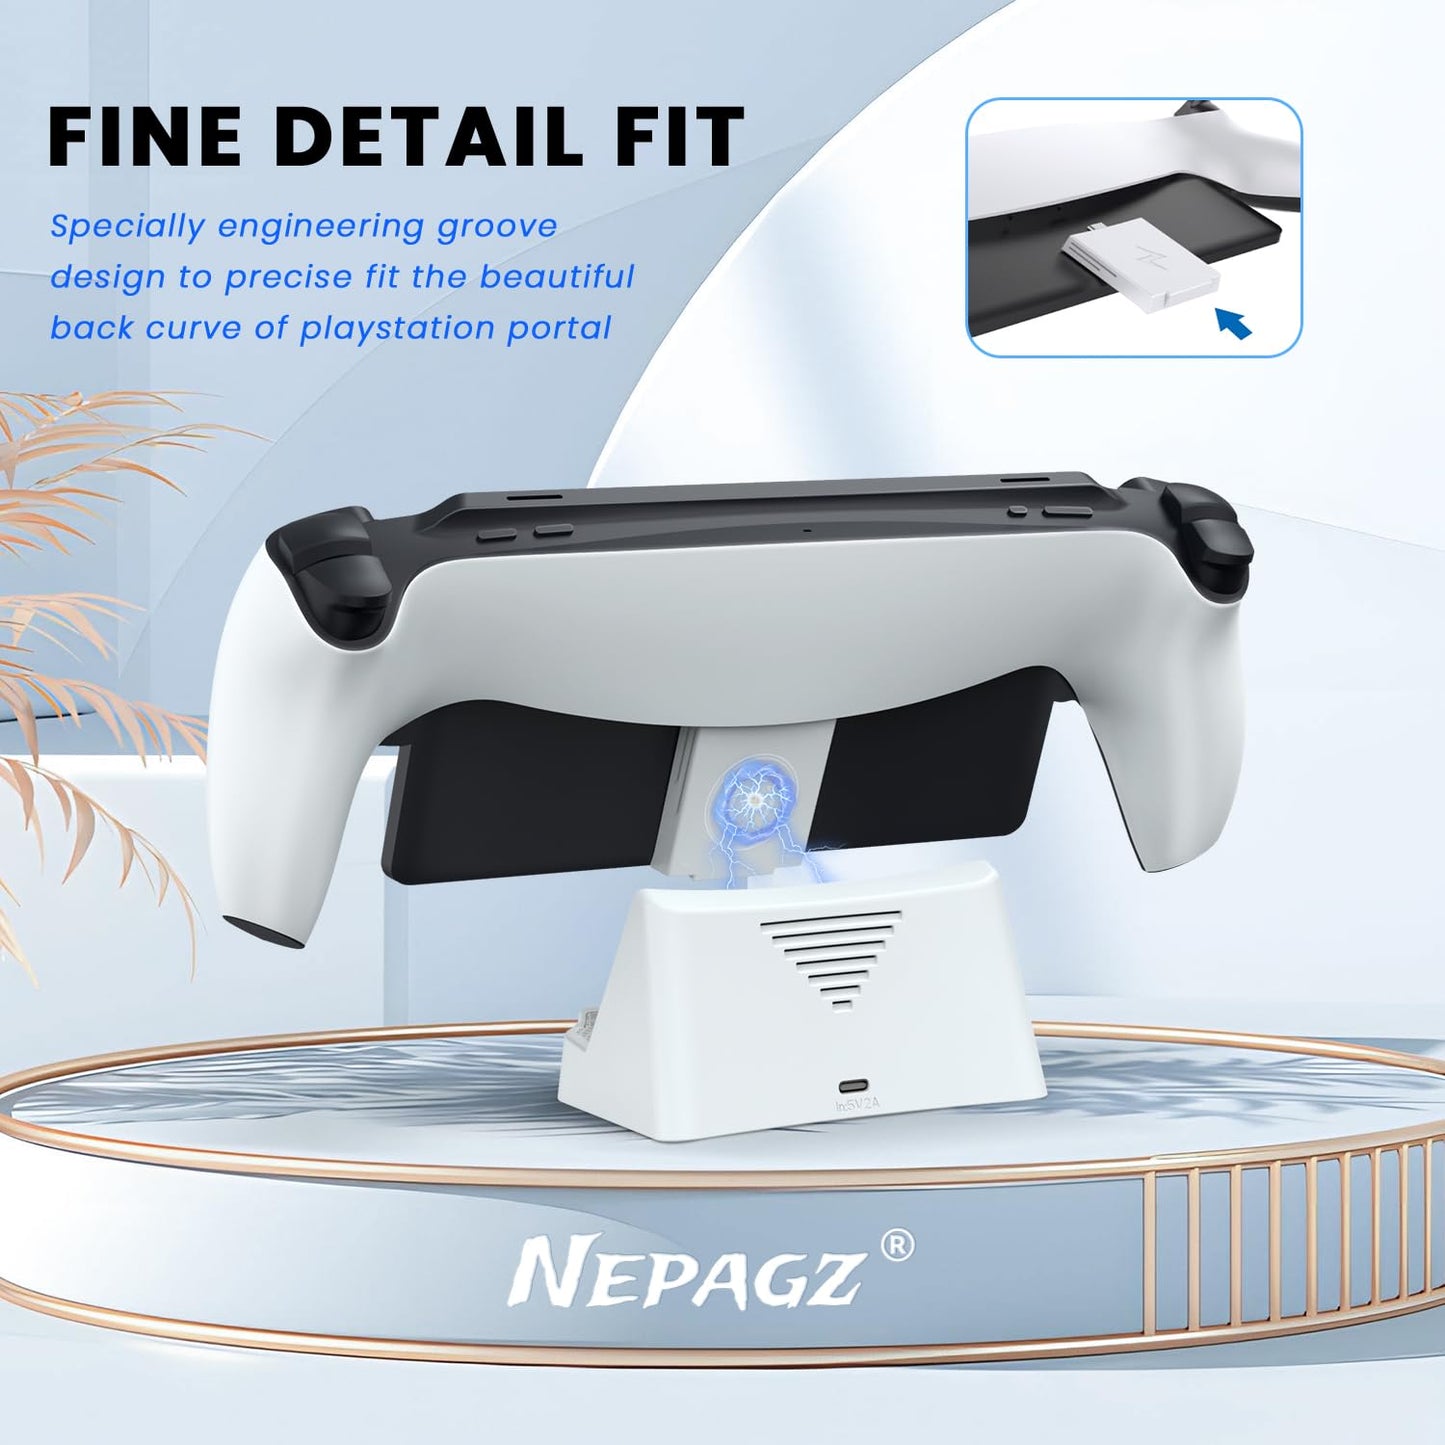 Nepagz Charging Stand for Playstation Remote Player - Playstation 5, Portable Wireless Charge Dock with Indicator Light and USB-C Cable for Playstation Portal Accessories, White - amzGamess